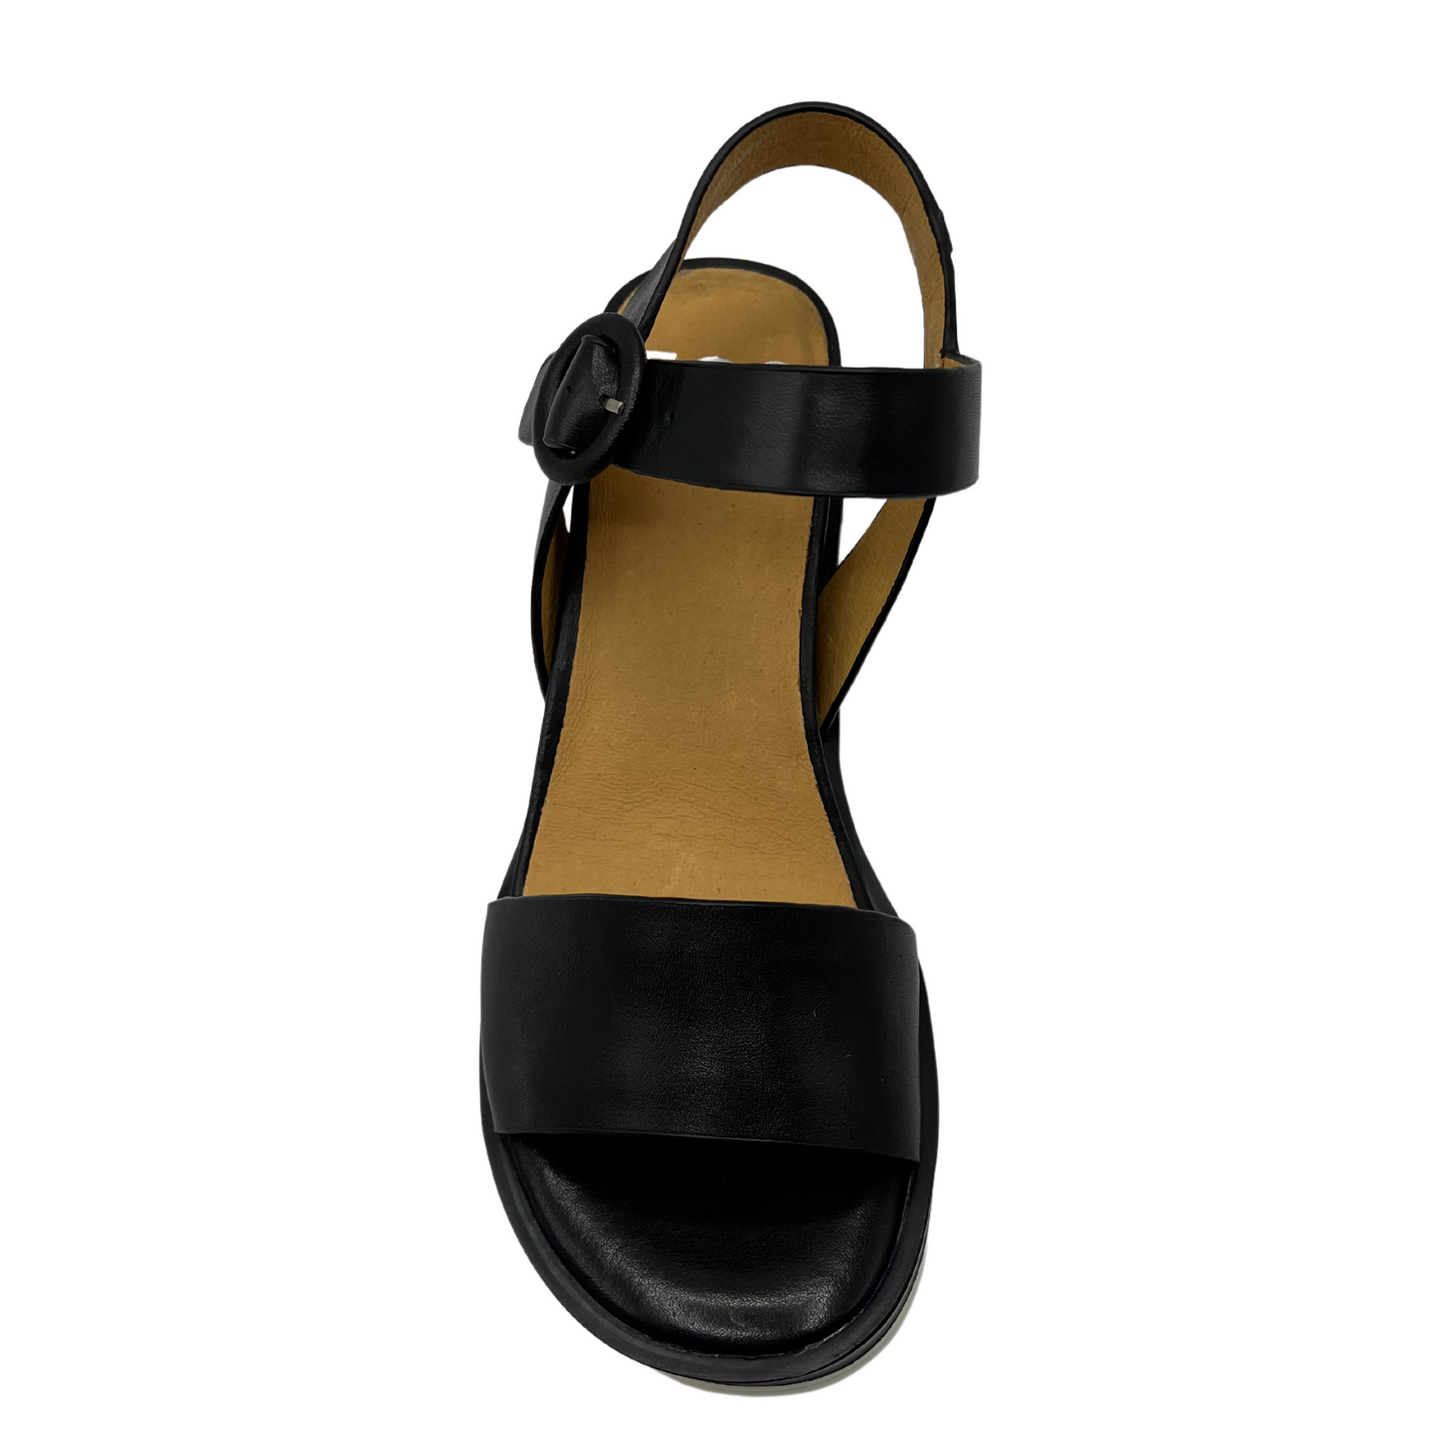 Top view of black leather sandal with rounded toe and buckle strap